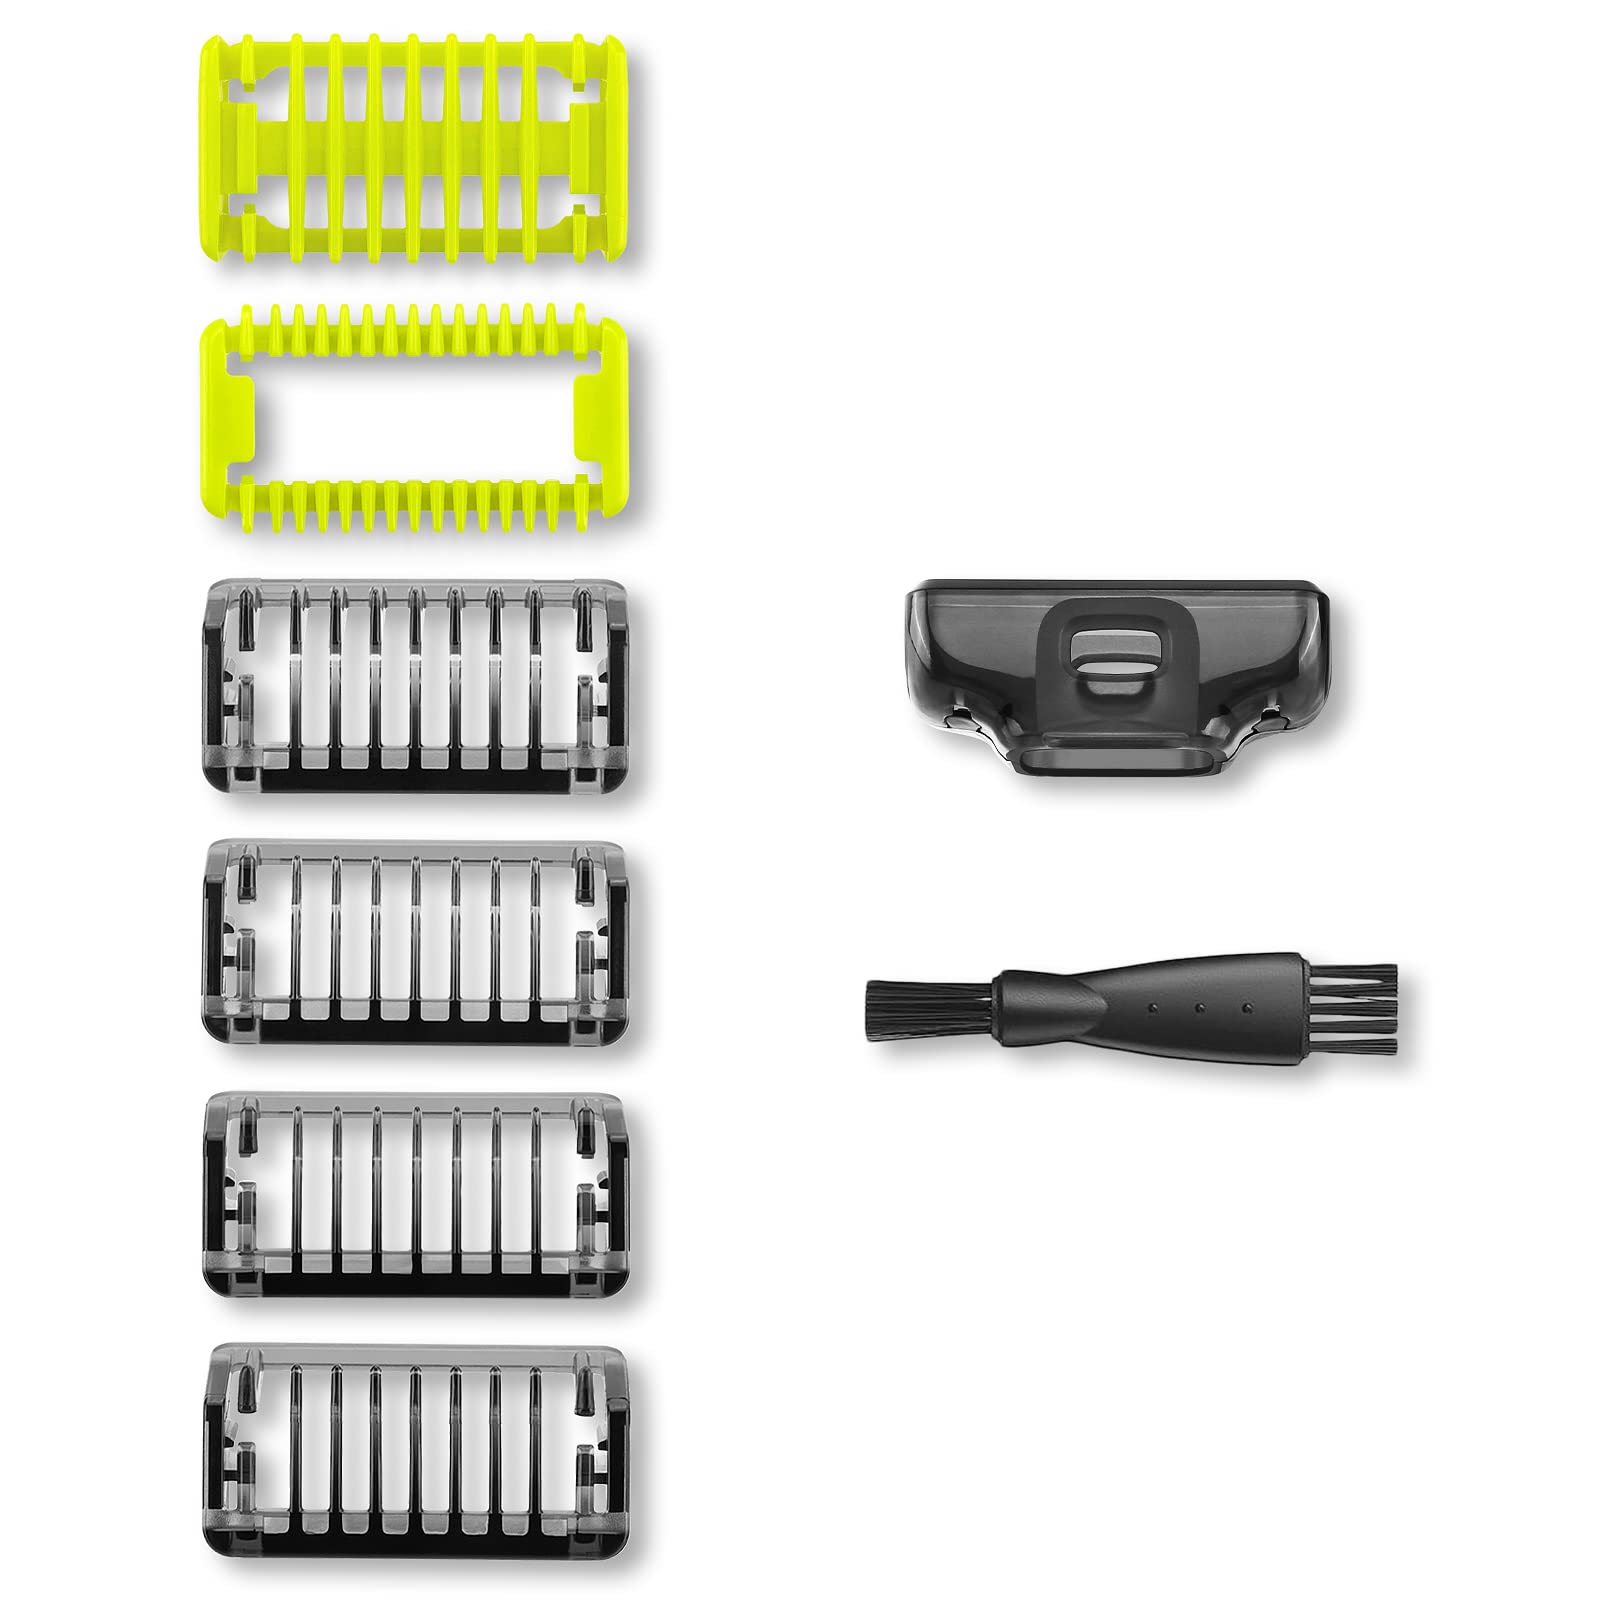 Guide Comb Guards Body Skin for Philips OneBlade & One Blade Pro Qp2520  Qp2530 Qp2620 Qp2630